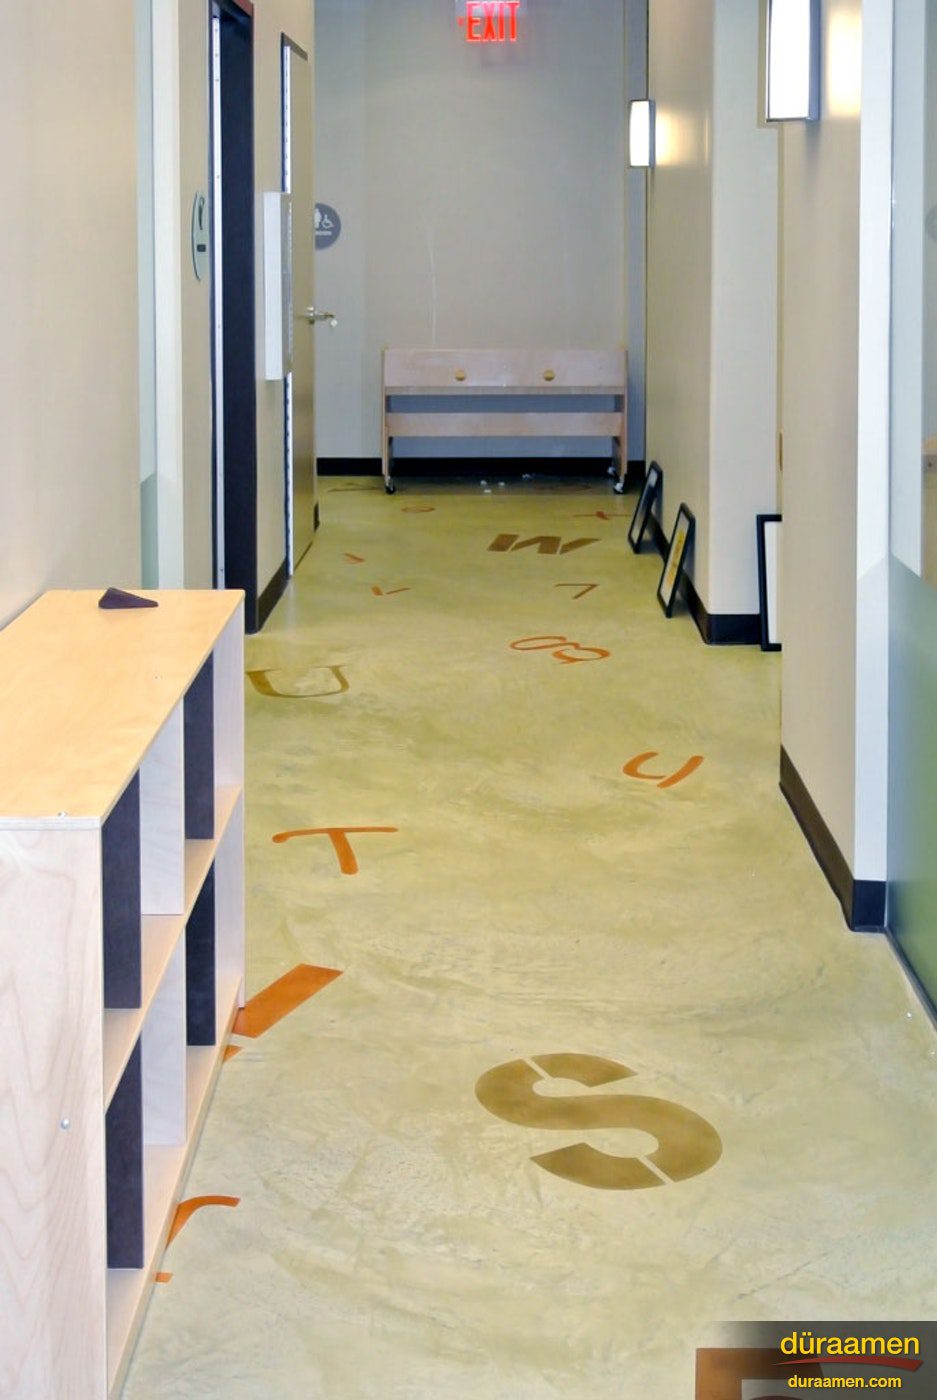 A resurfaced concrete floor yields many design possibilities. This daycare center had letters and numbers stenciled on the floor using playful colors.